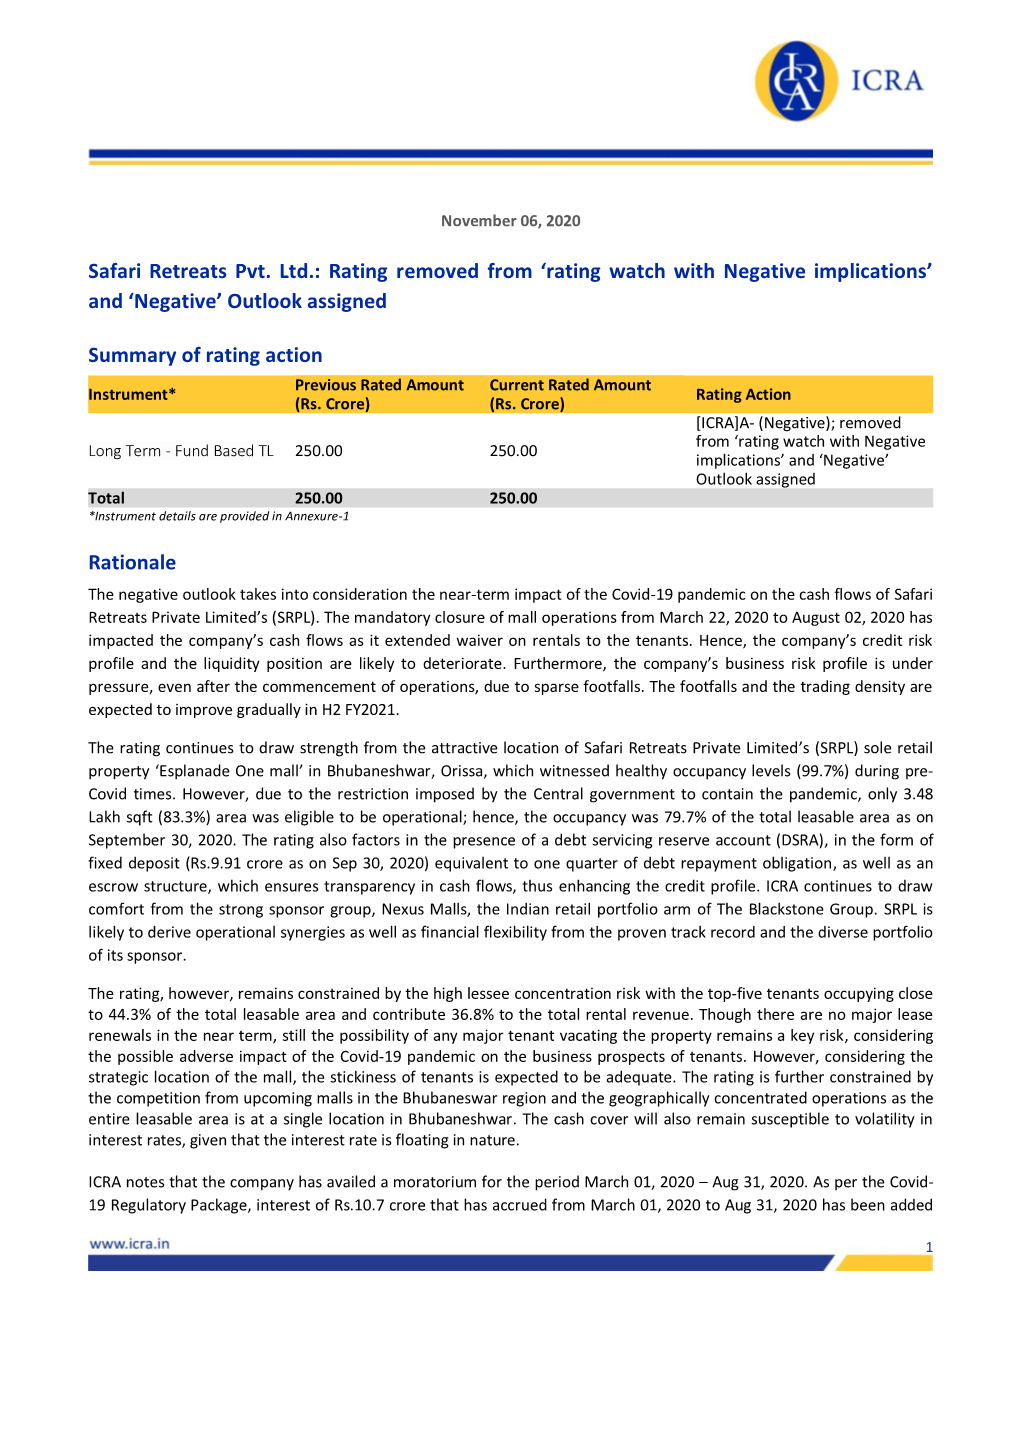 Safari Retreats Pvt. Ltd.: Rating Removed from ‘Rating Watch with Negative Implications’ and ‘Negative’ Outlook Assigned